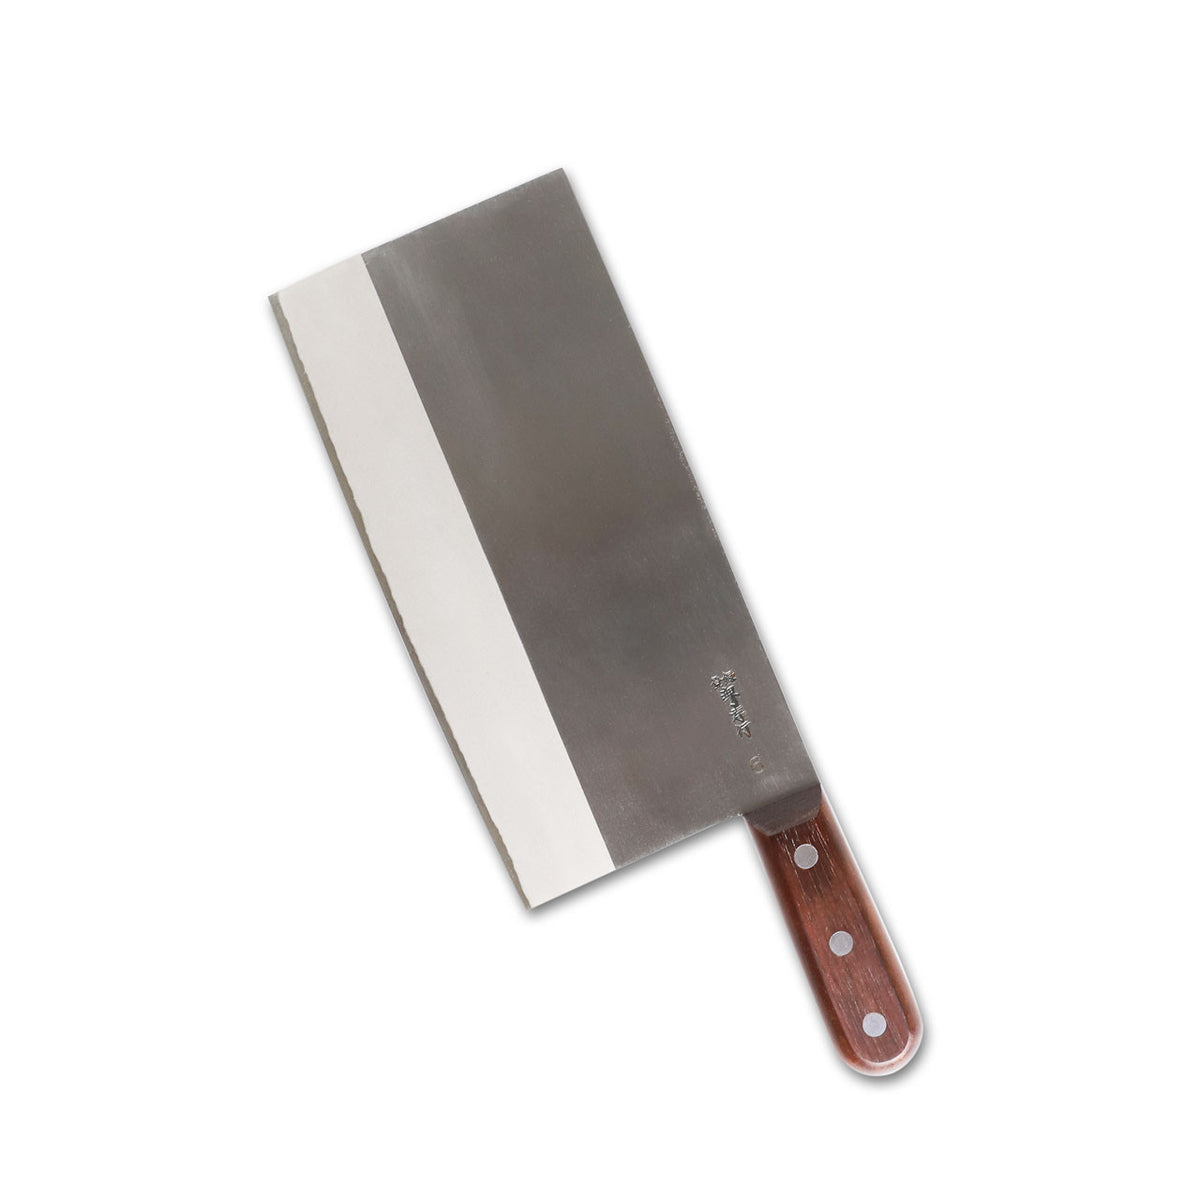 Chinese Cleaver versus Meat Cleaver 